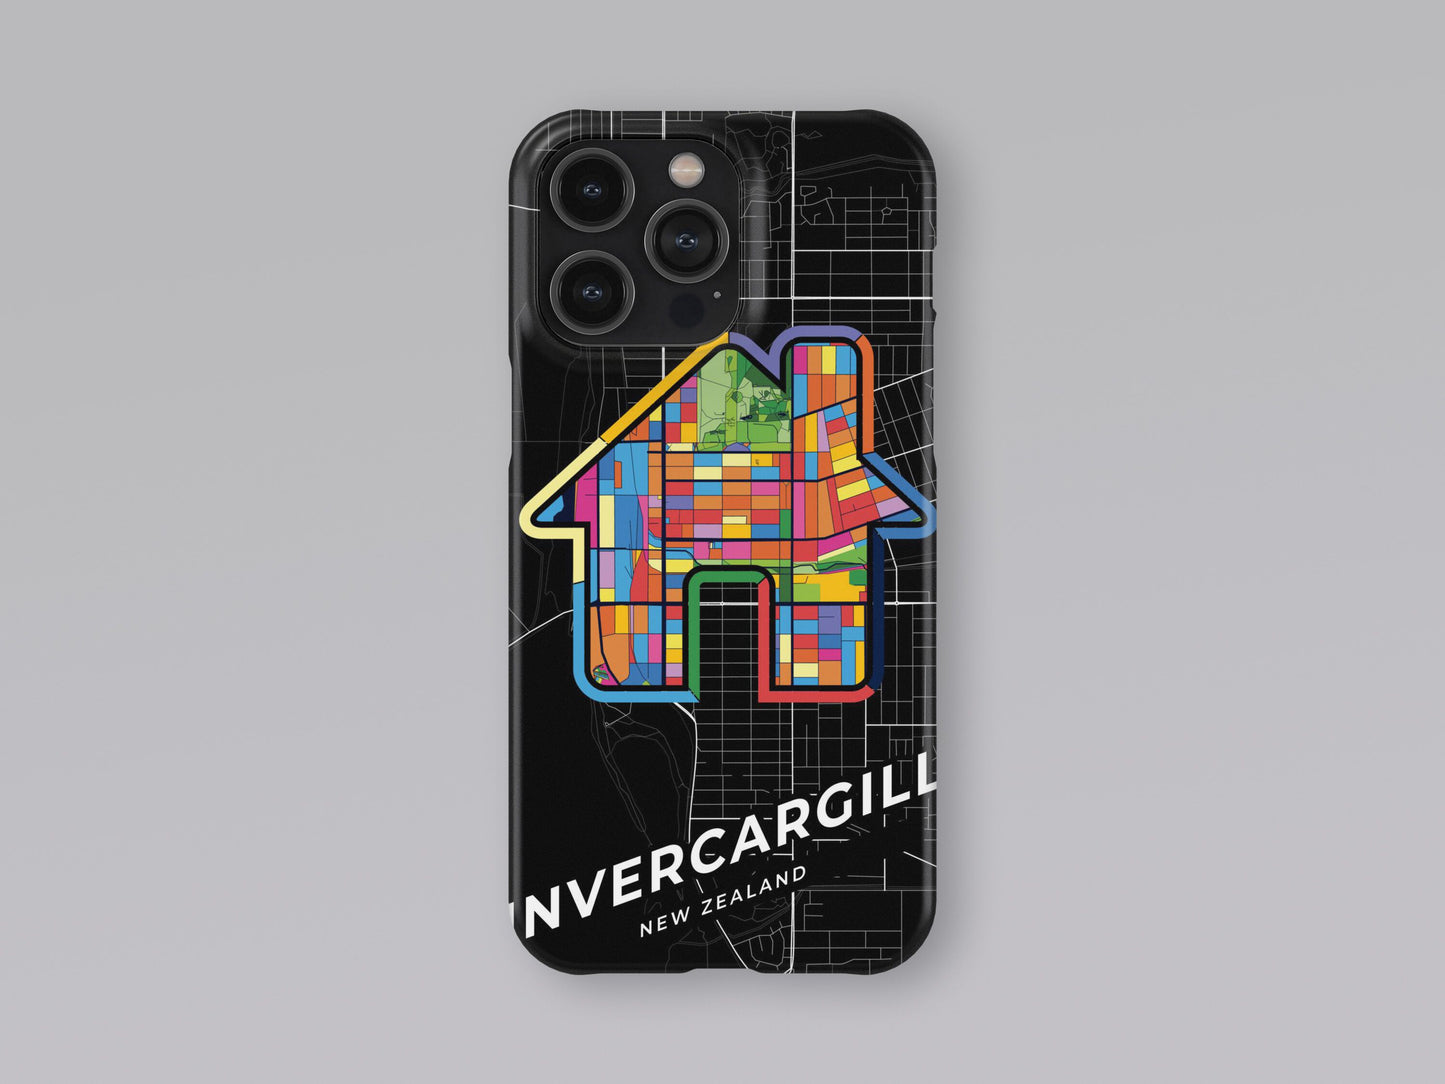 Invercargill New Zealand slim phone case with colorful icon. Birthday, wedding or housewarming gift. Couple match cases. 3